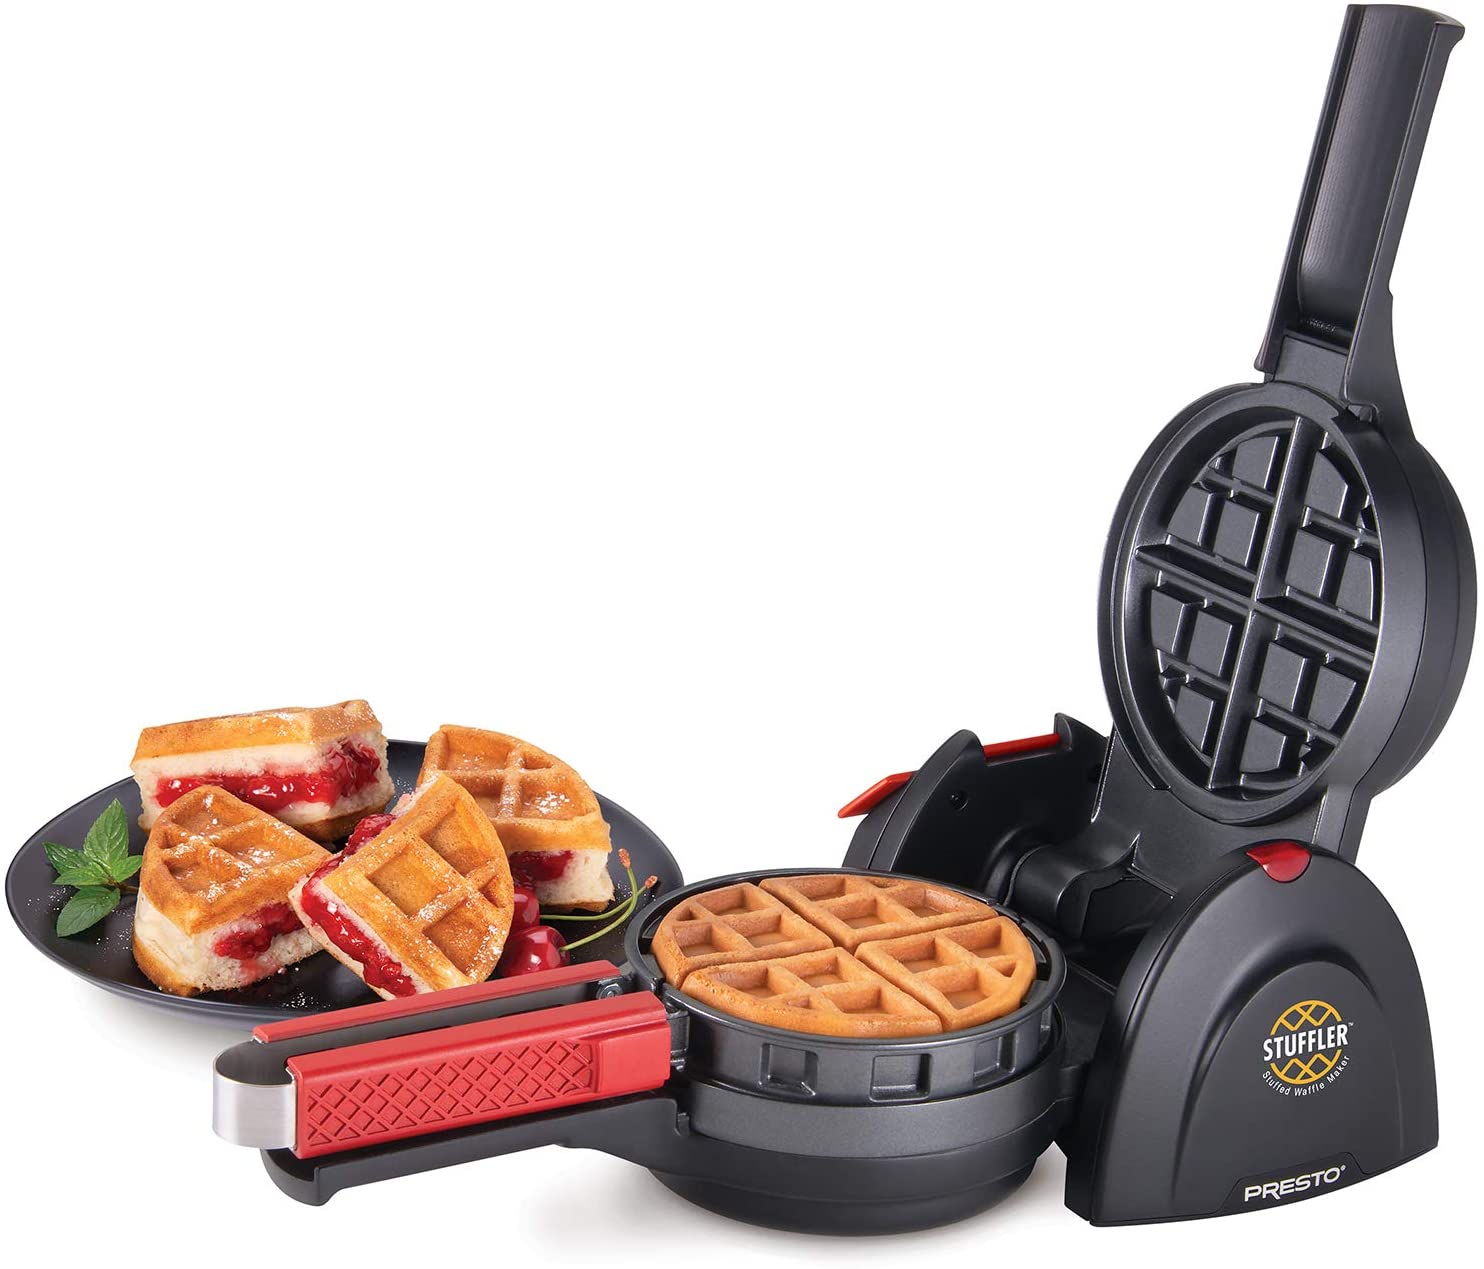 Whip Up Amazing Breakfasts With Stuffed Waffle Maker